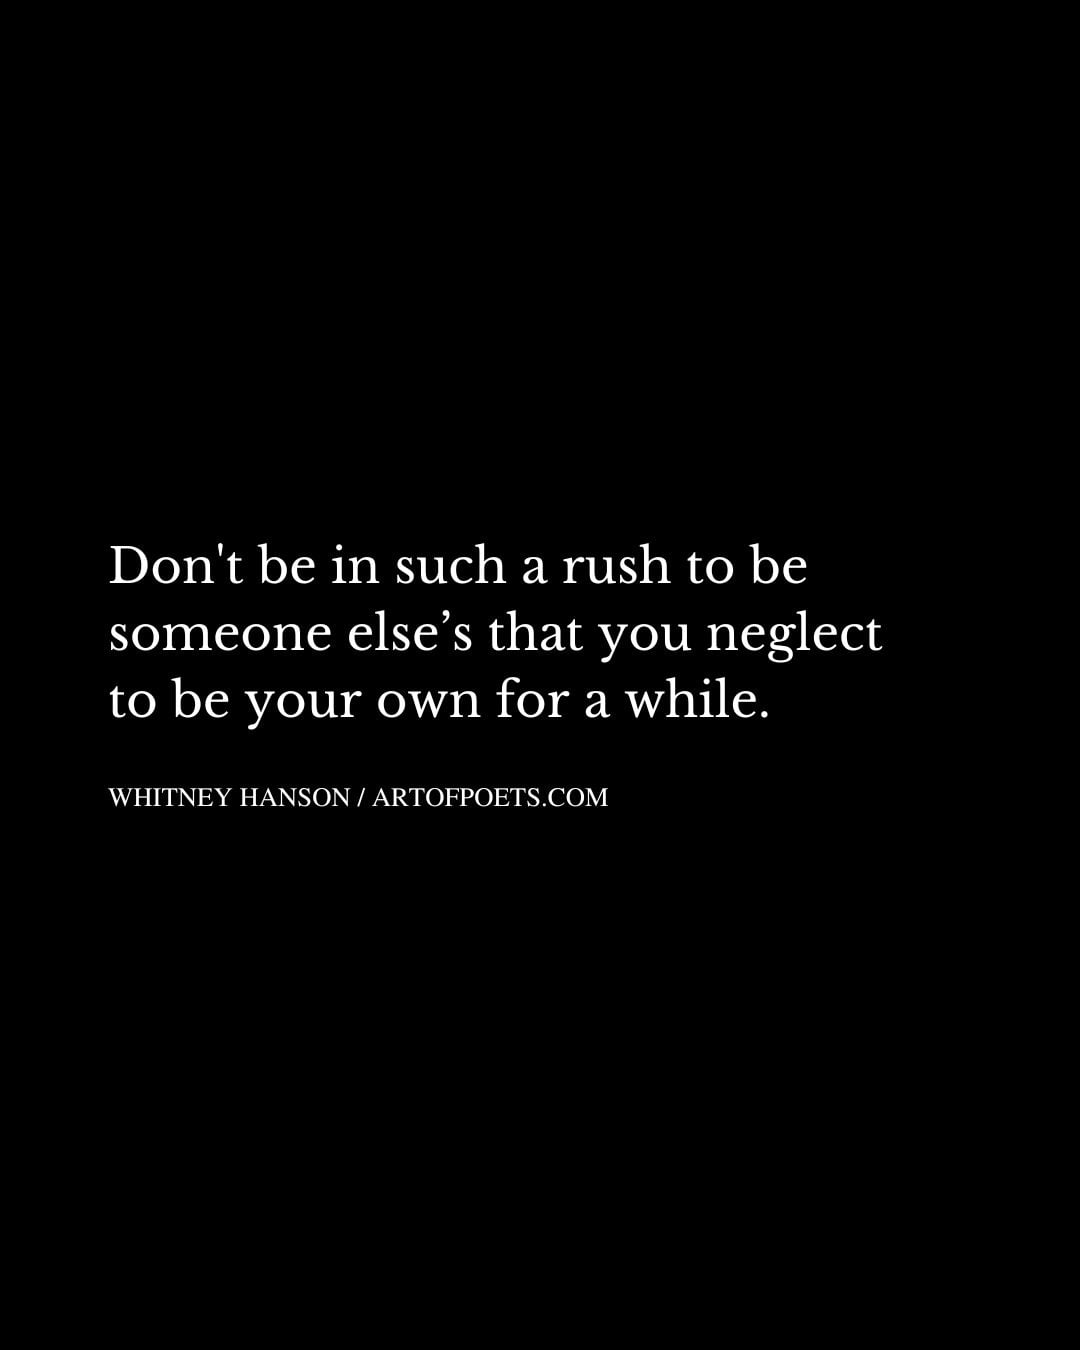 Dont be in such a rush to be someone elses that you neglect to be your own for a while